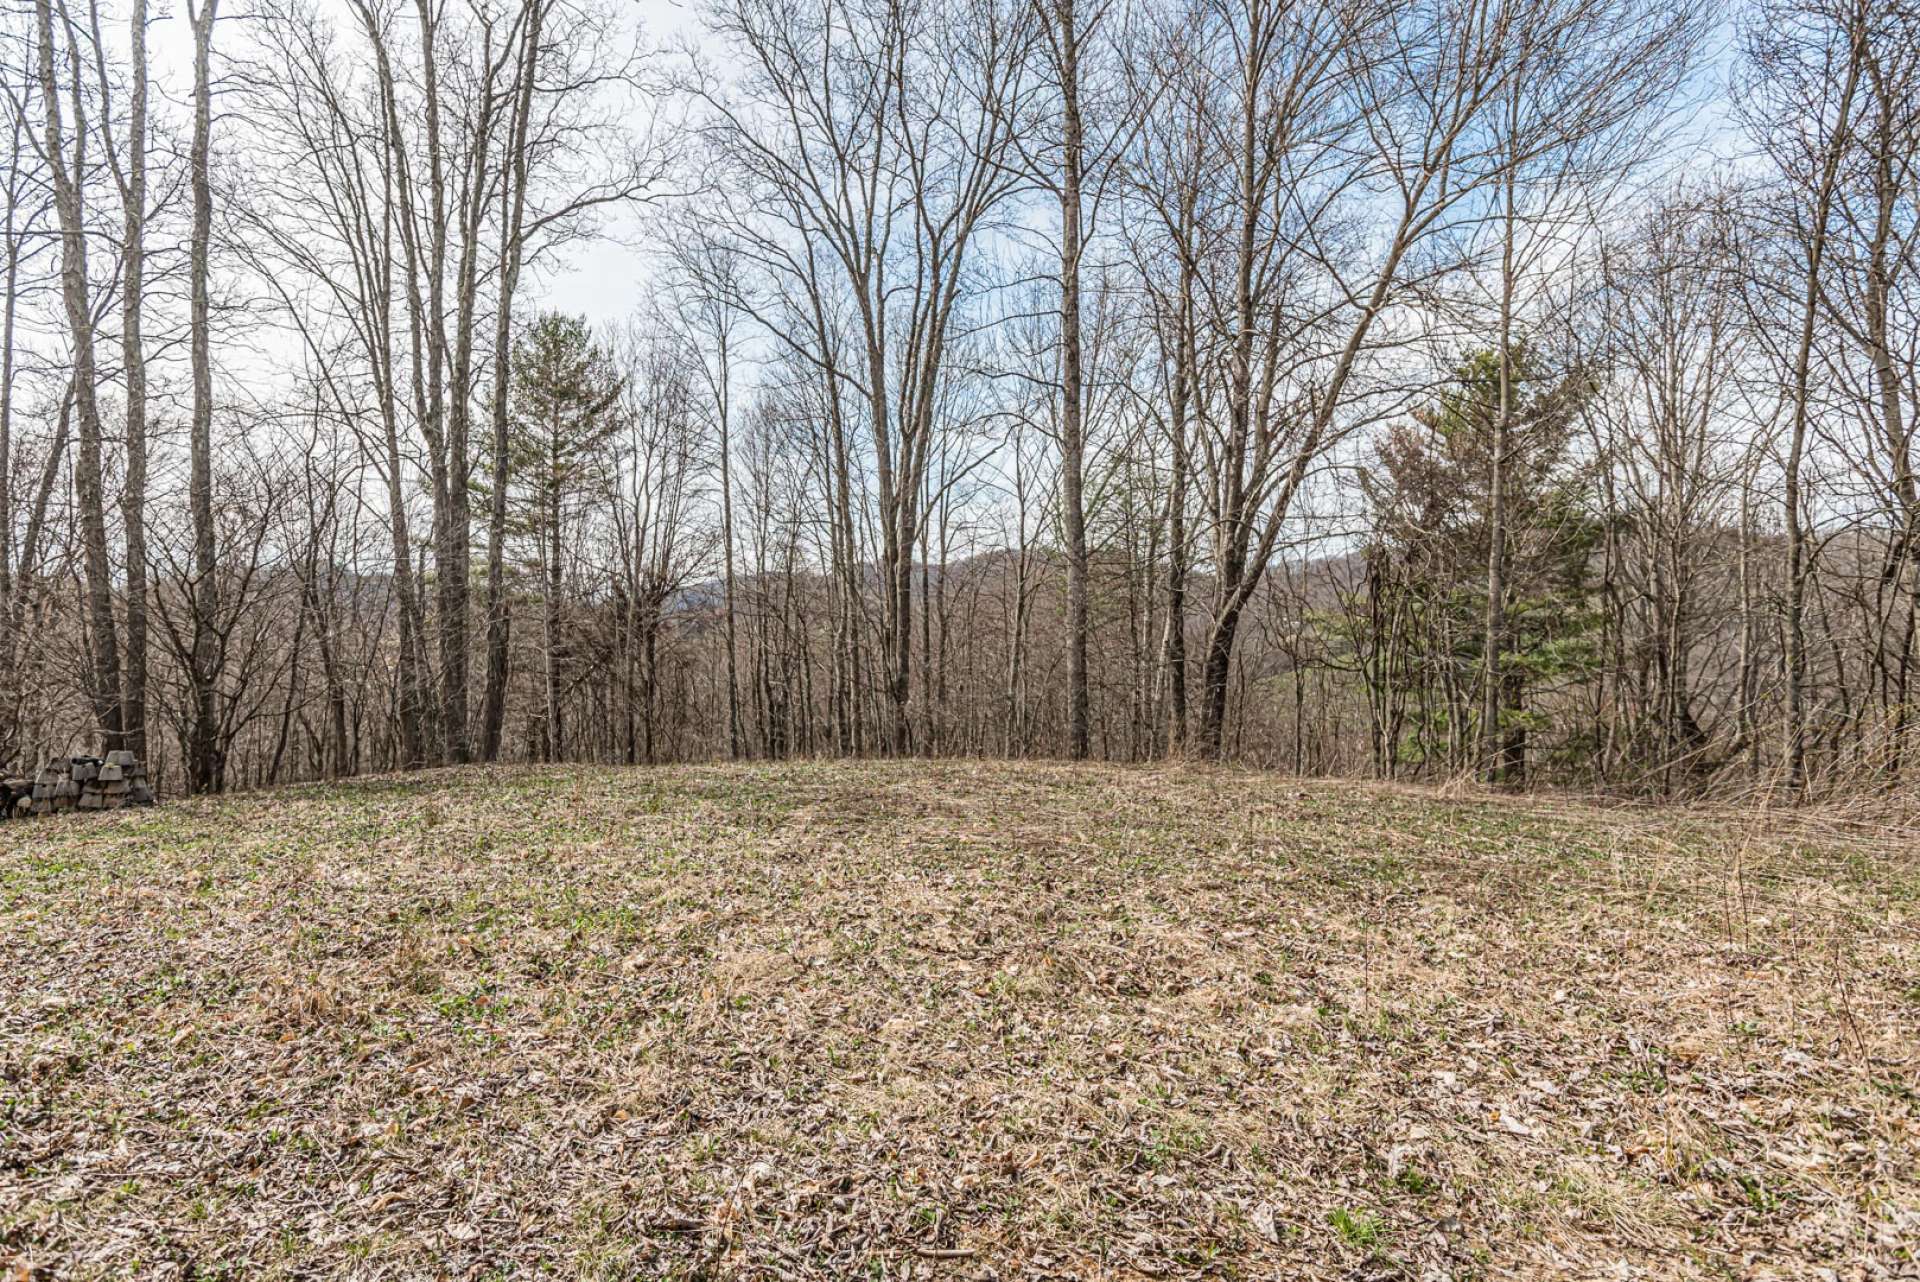  The location is perfect for the construction of your large NC Mountain home, cabin, or tiny home of your dreams! 